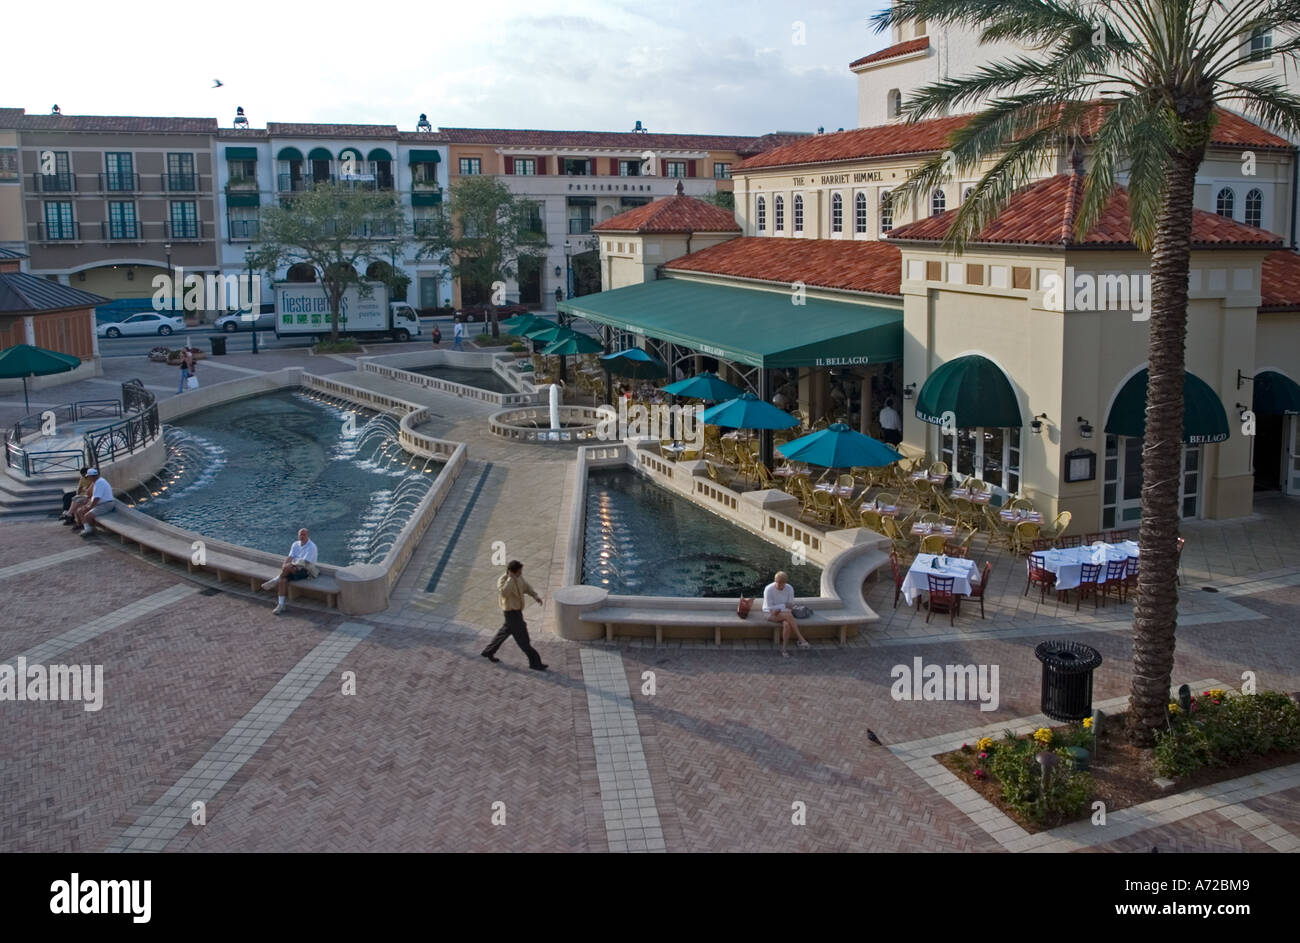 Rear of Harriet Himmel Gilman Theater and Il Bellagio restaurant City Place West Palm Beach Florida Stock Photo